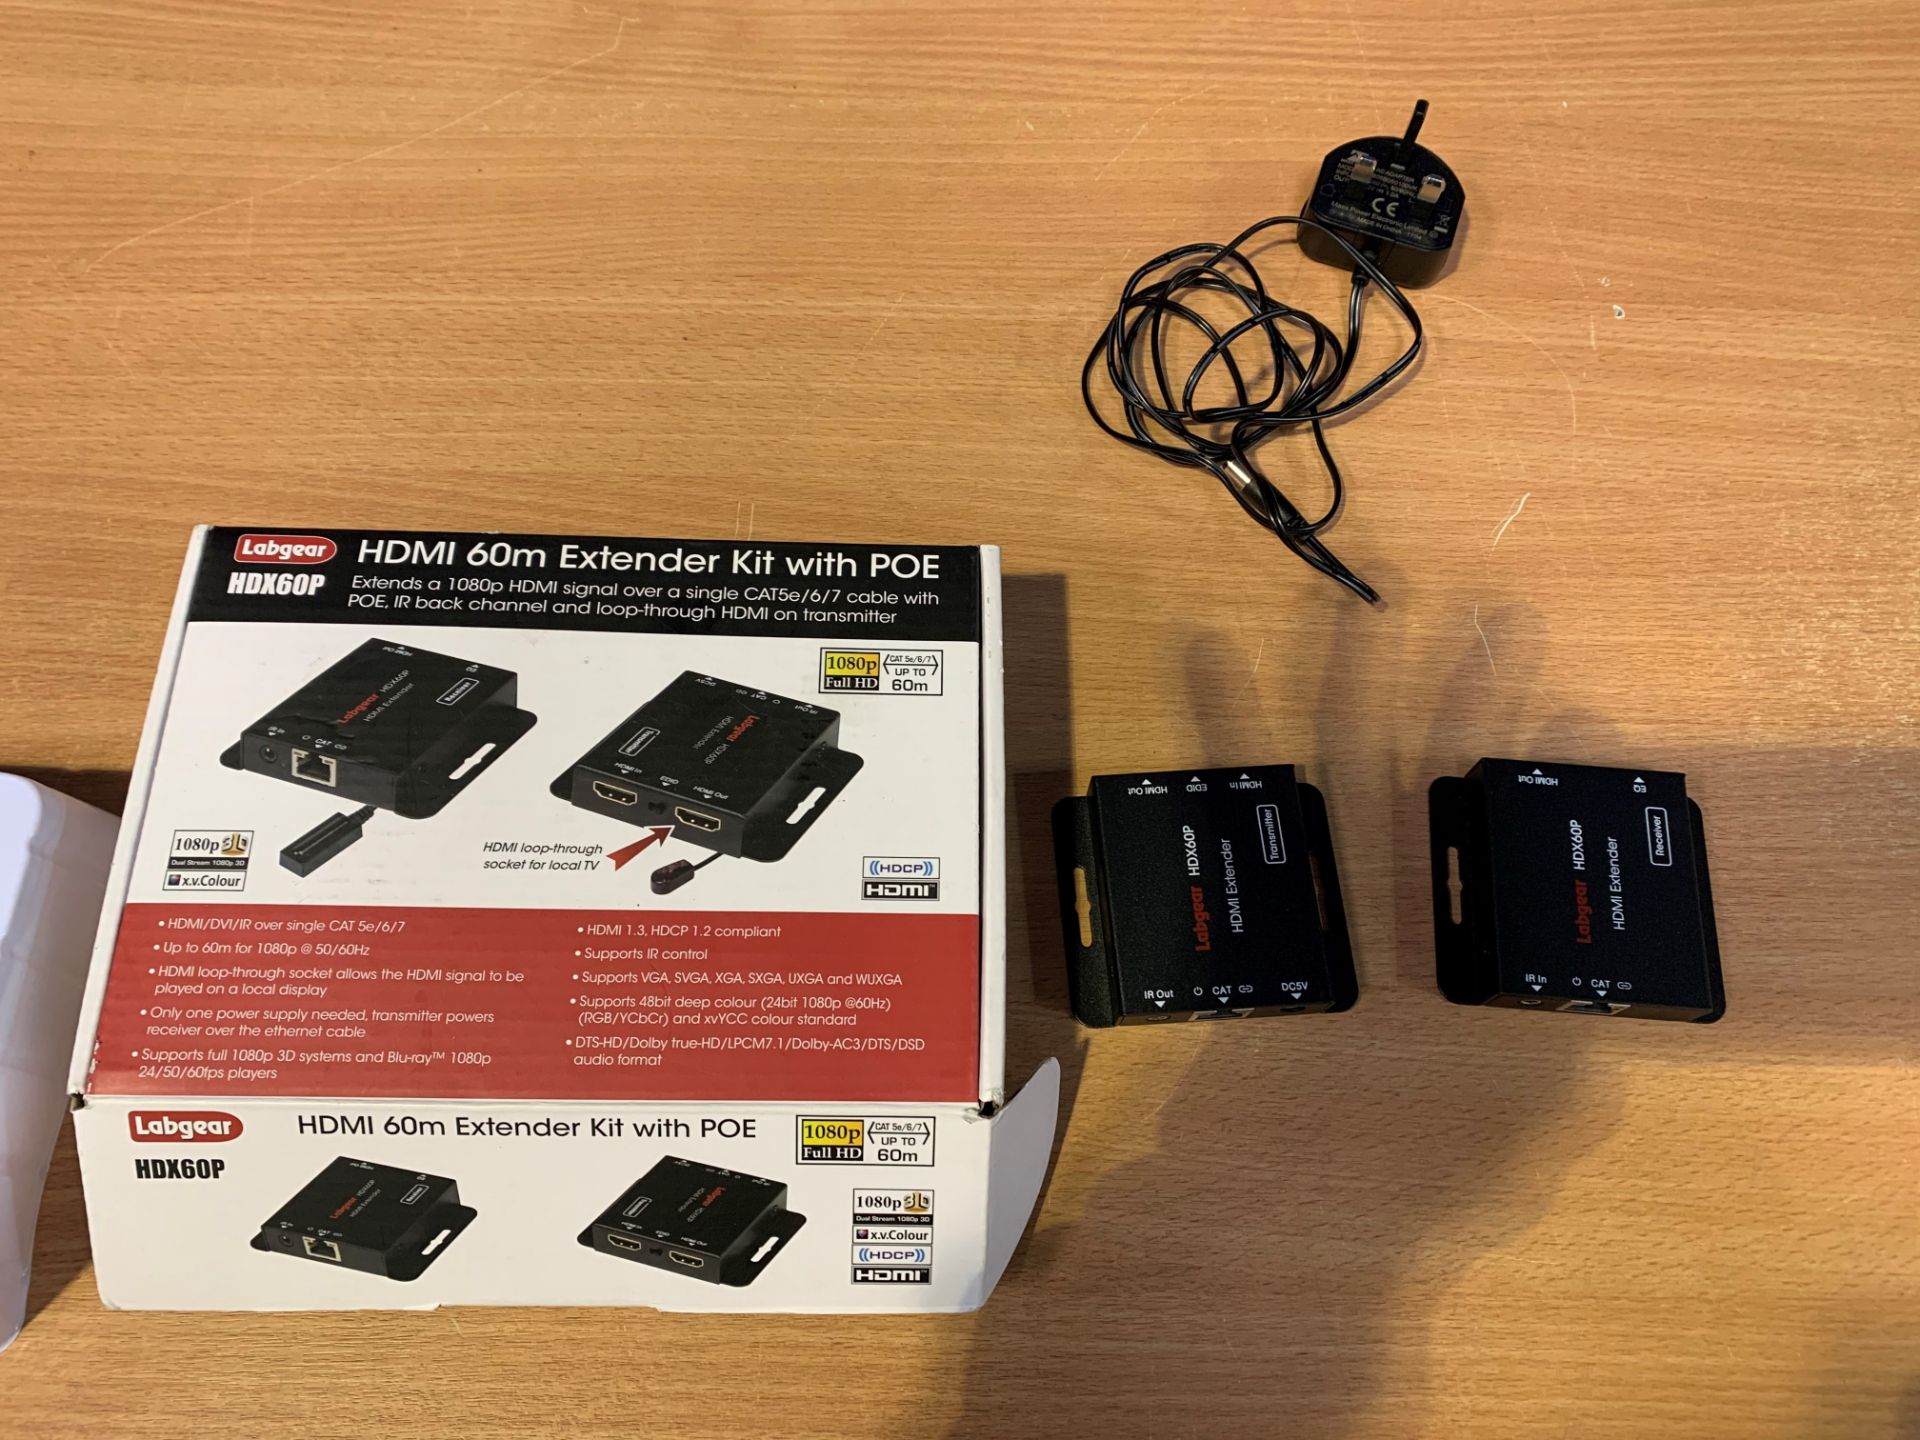 Labgear HDX60P HDMI Extender Kit with POE - Image 4 of 4